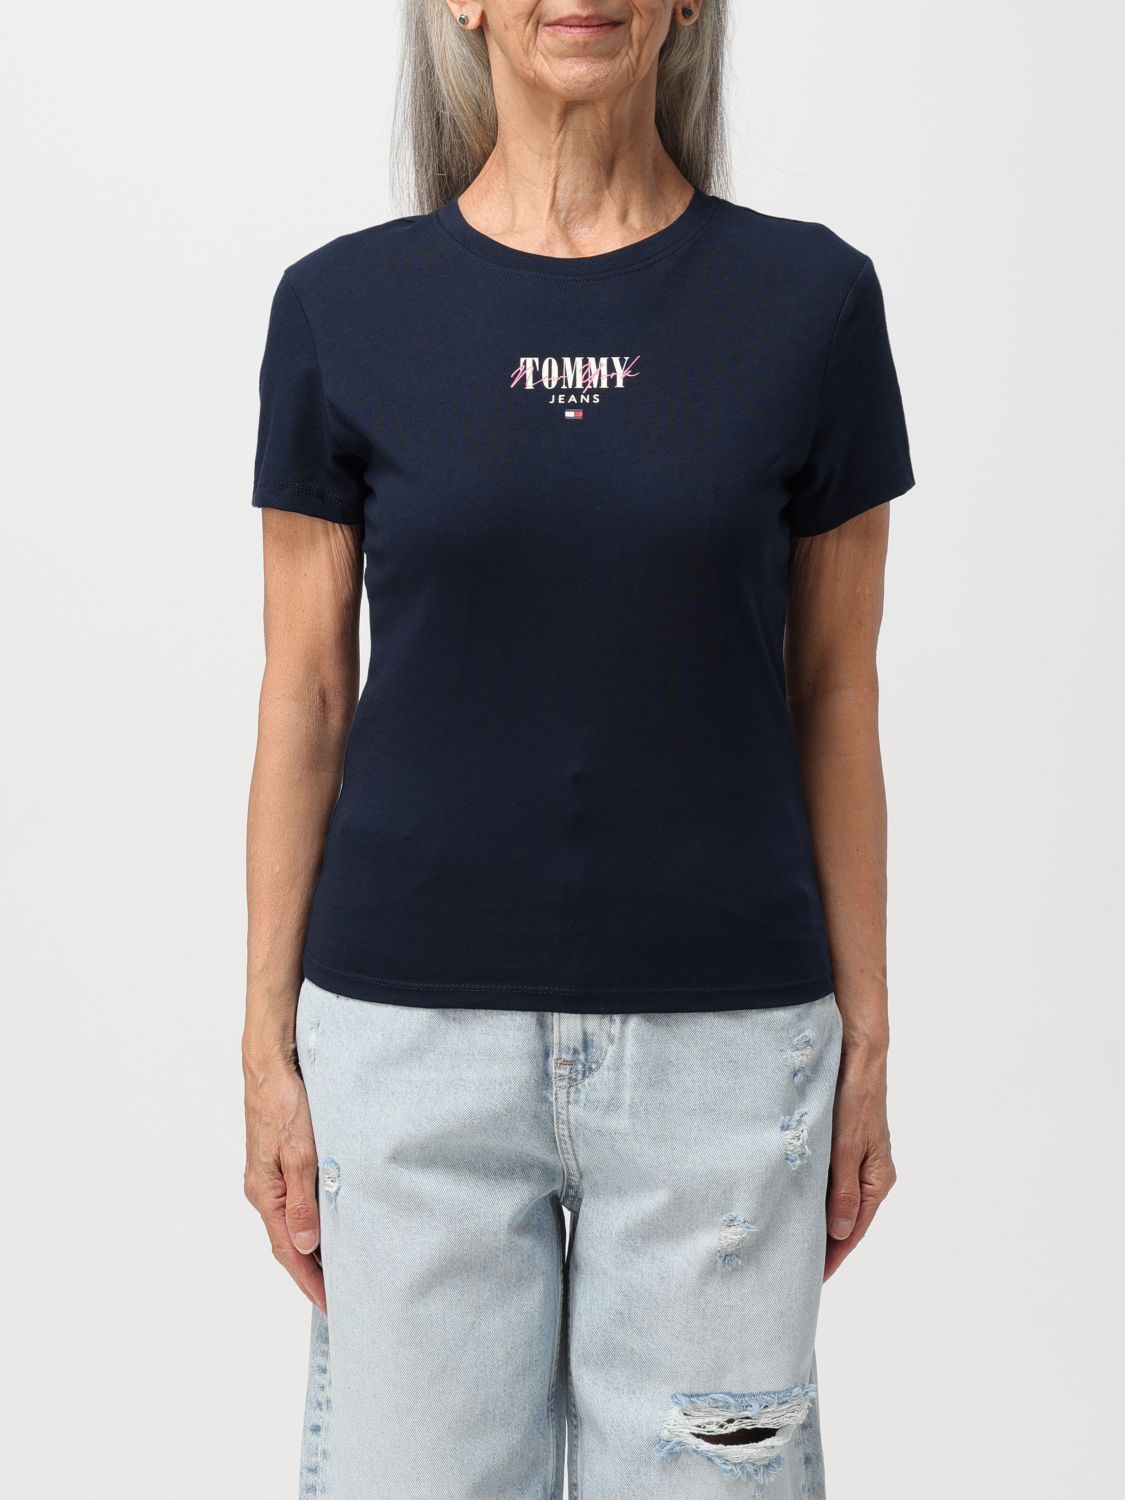 Tommy Jeans T-Shirt TOMMY JEANS Woman colour Navy